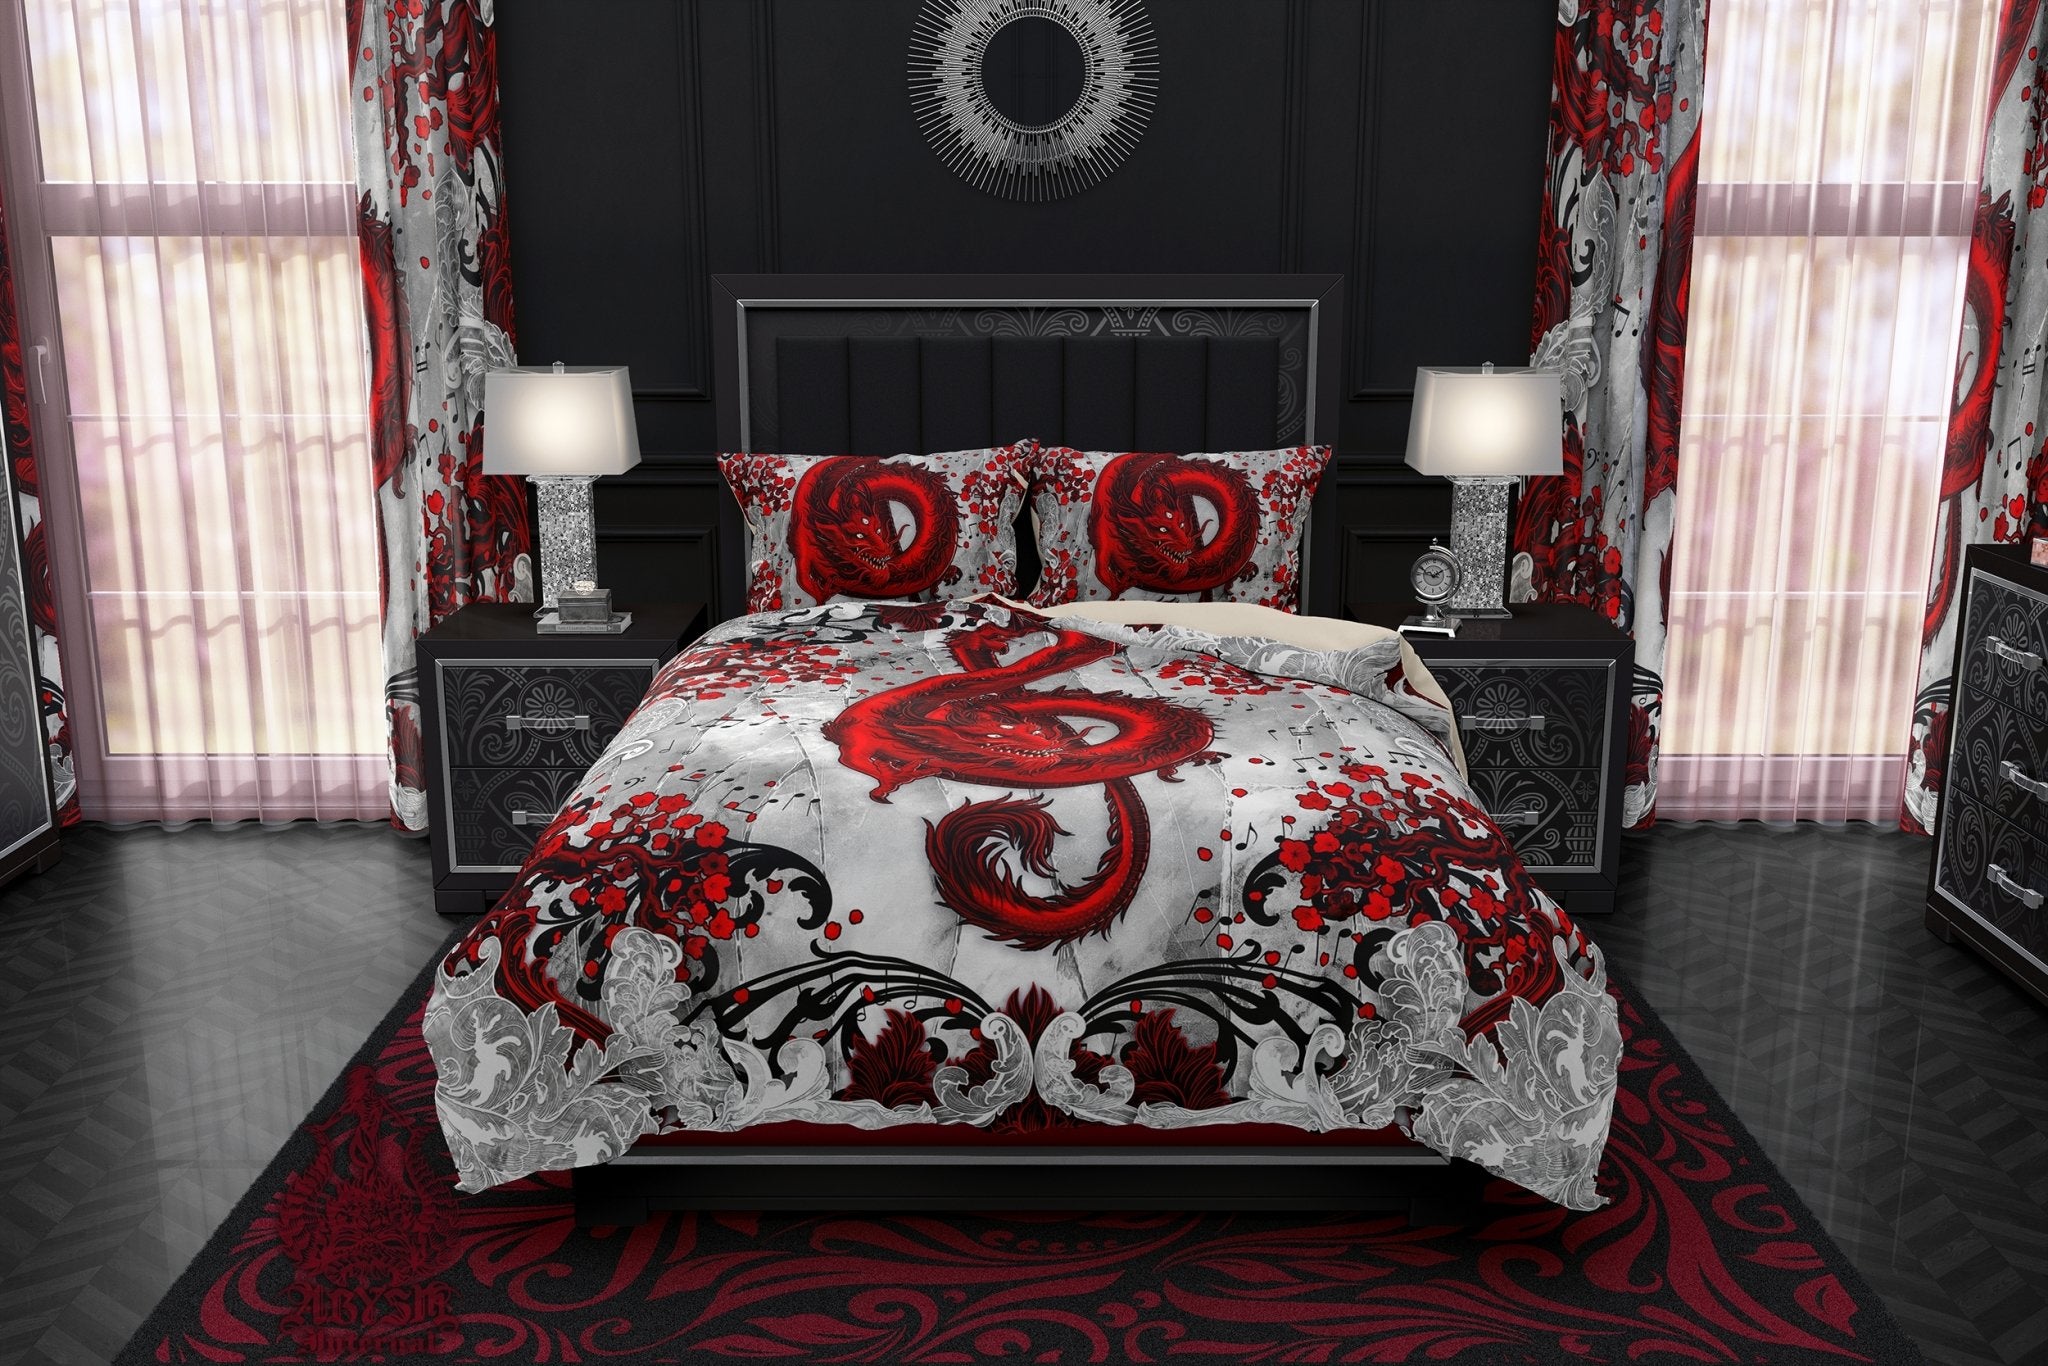 Red Dragon Bedding Set, Comforter and Duvet, Bloody White Goth Bed Cover and Bedroom Decor, King, Queen and Twin Size - Music Art - Abysm Internal